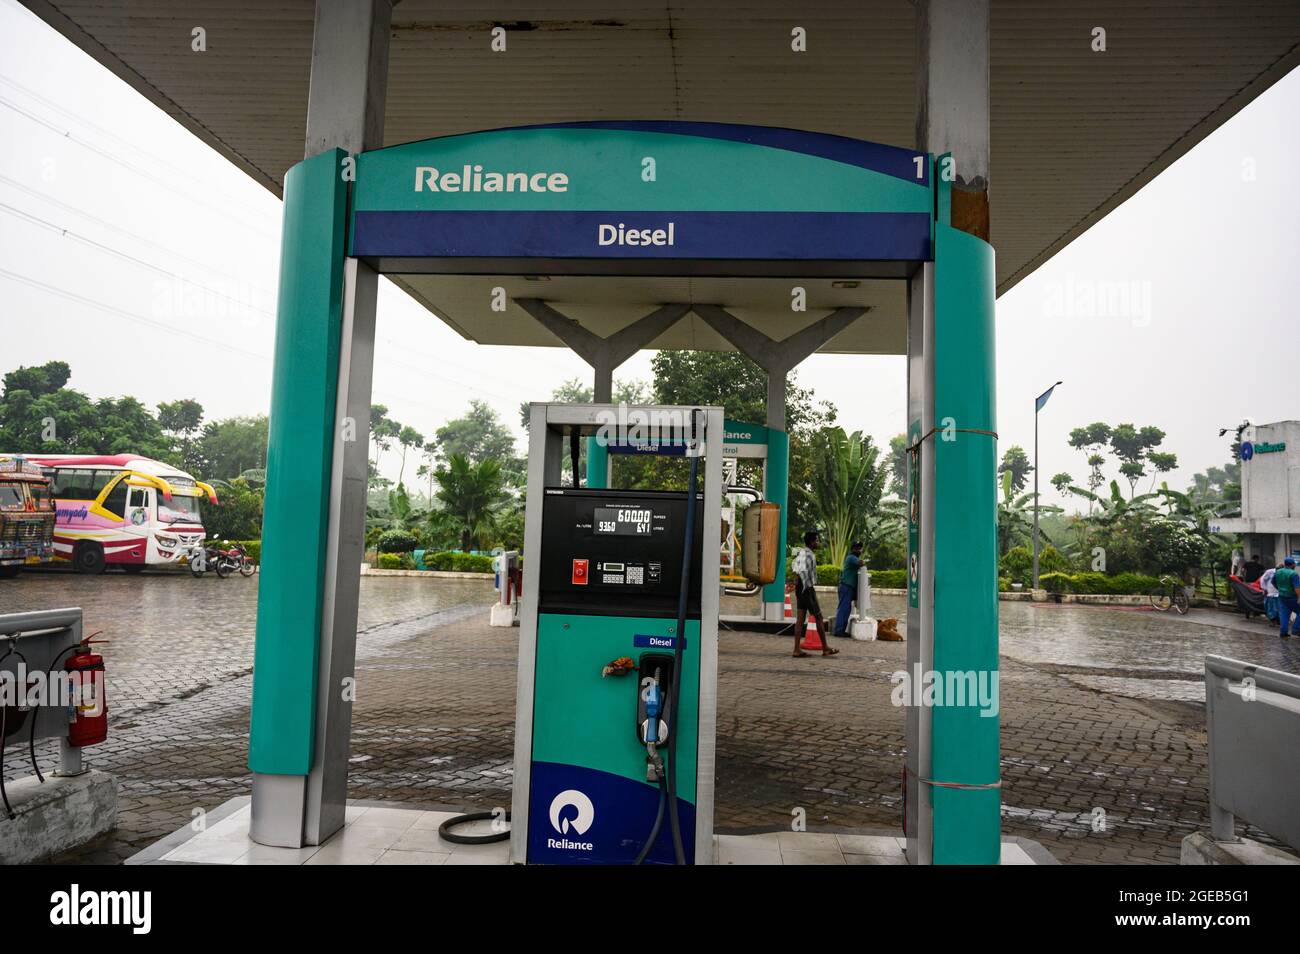 Reliance BP Mobility Ltd, the fuel marketing joint venture of India's largest and most profitable private sector company Reliance Industries Ltd (RIL) and UK's energy major BP Plc, is planning to open retail outlets including convenience stores and food joints at a number of its fuel stations, mainly along the highways. Birohi, West Bengal; India. Stock Photo